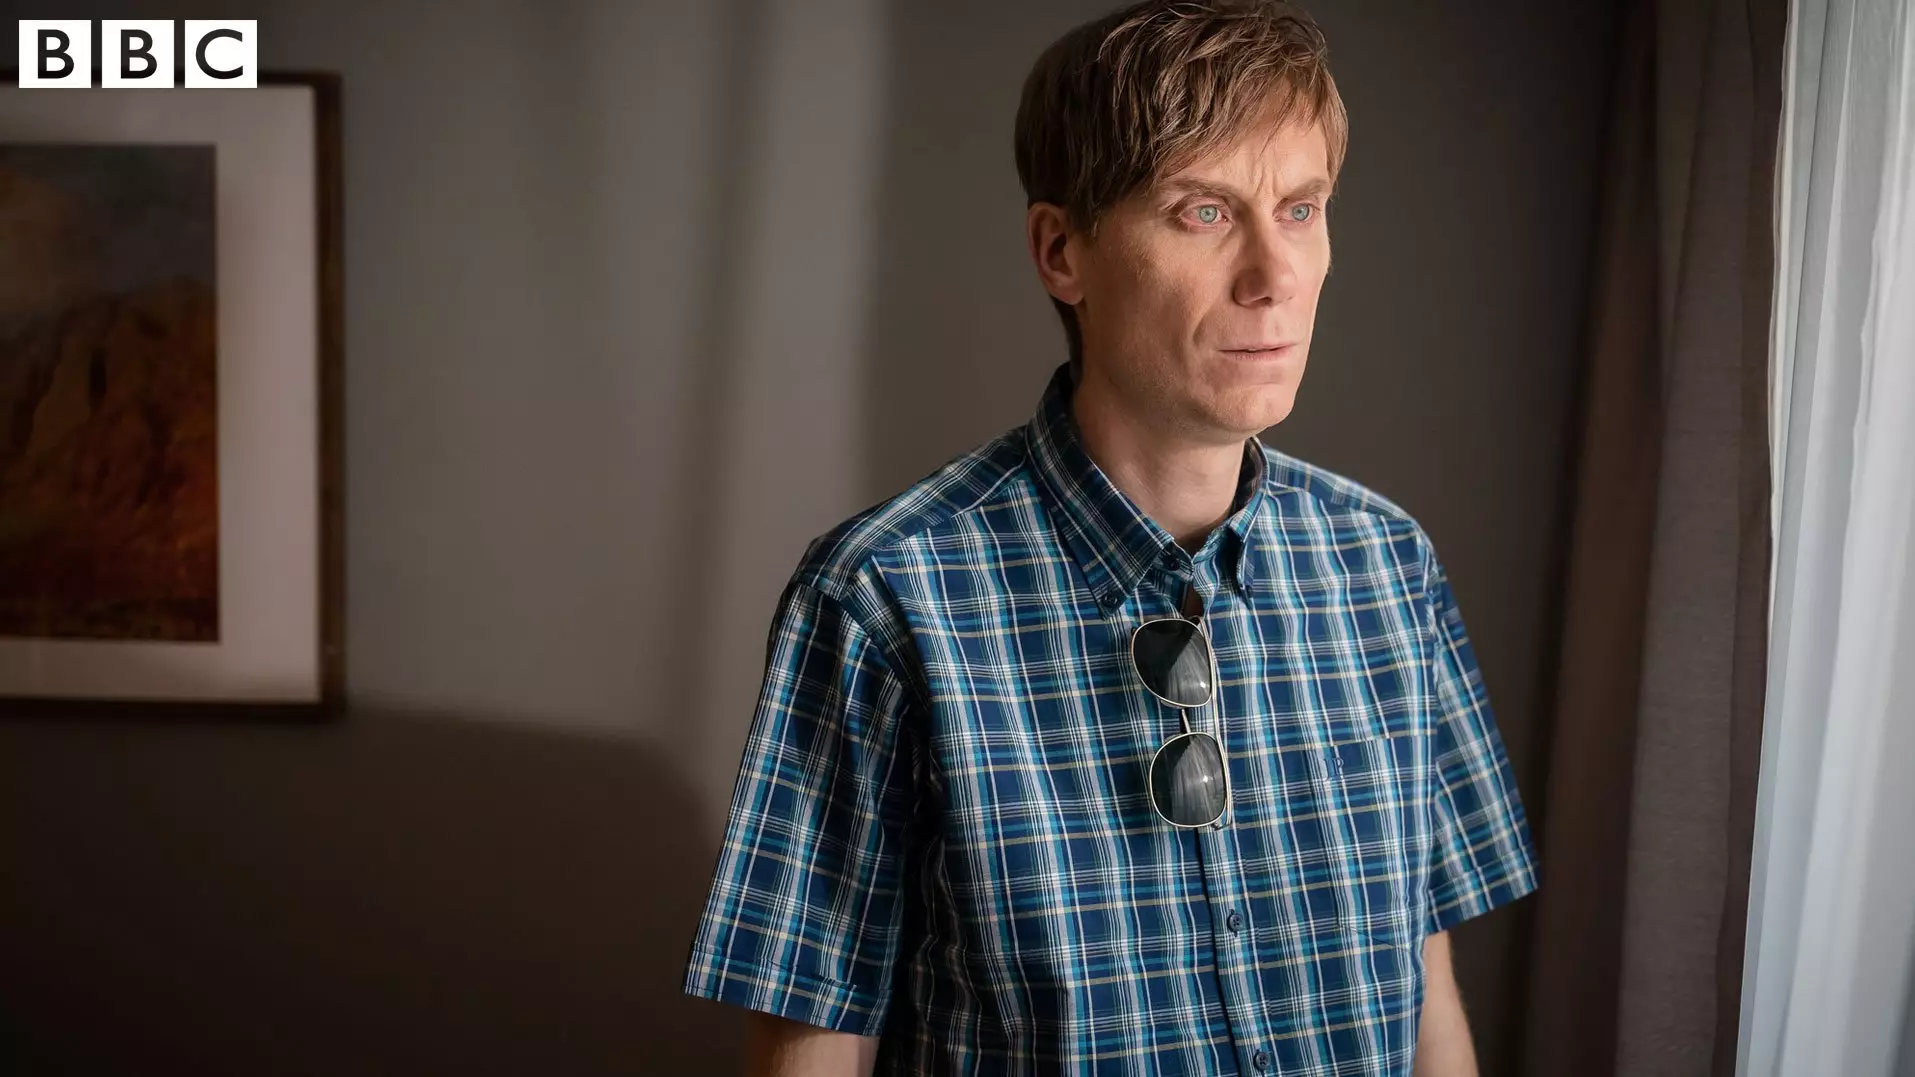 Take A First Look At Stephen Merchant As Serial Killer Stephen Port in ‘The Barking Murders’